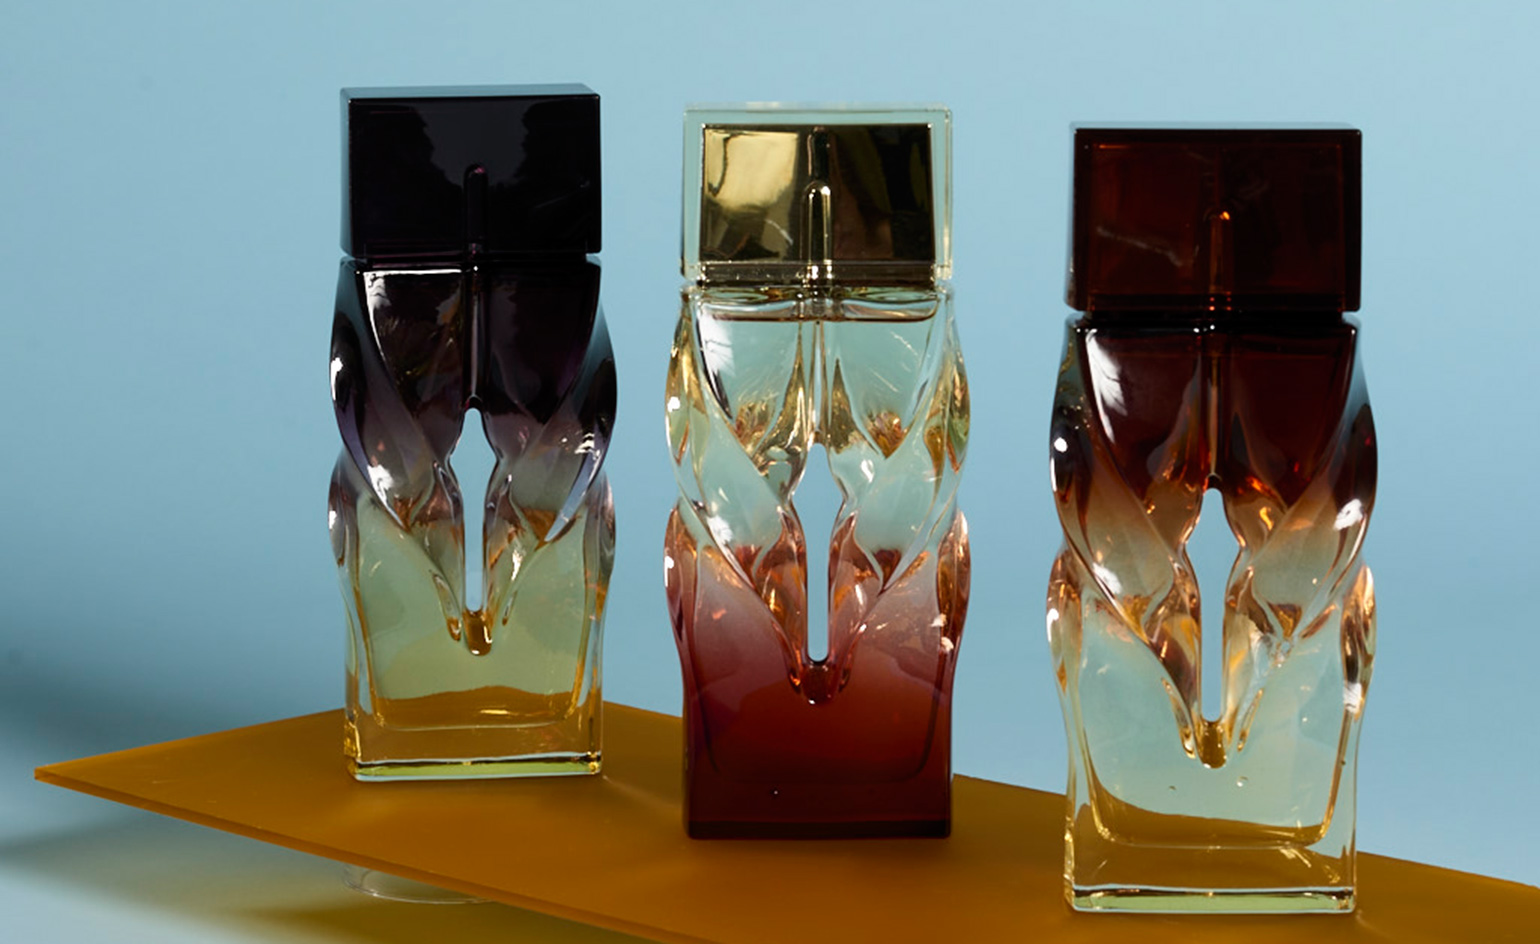 Christian Louboutin will launch his first-ever collection of fragrances